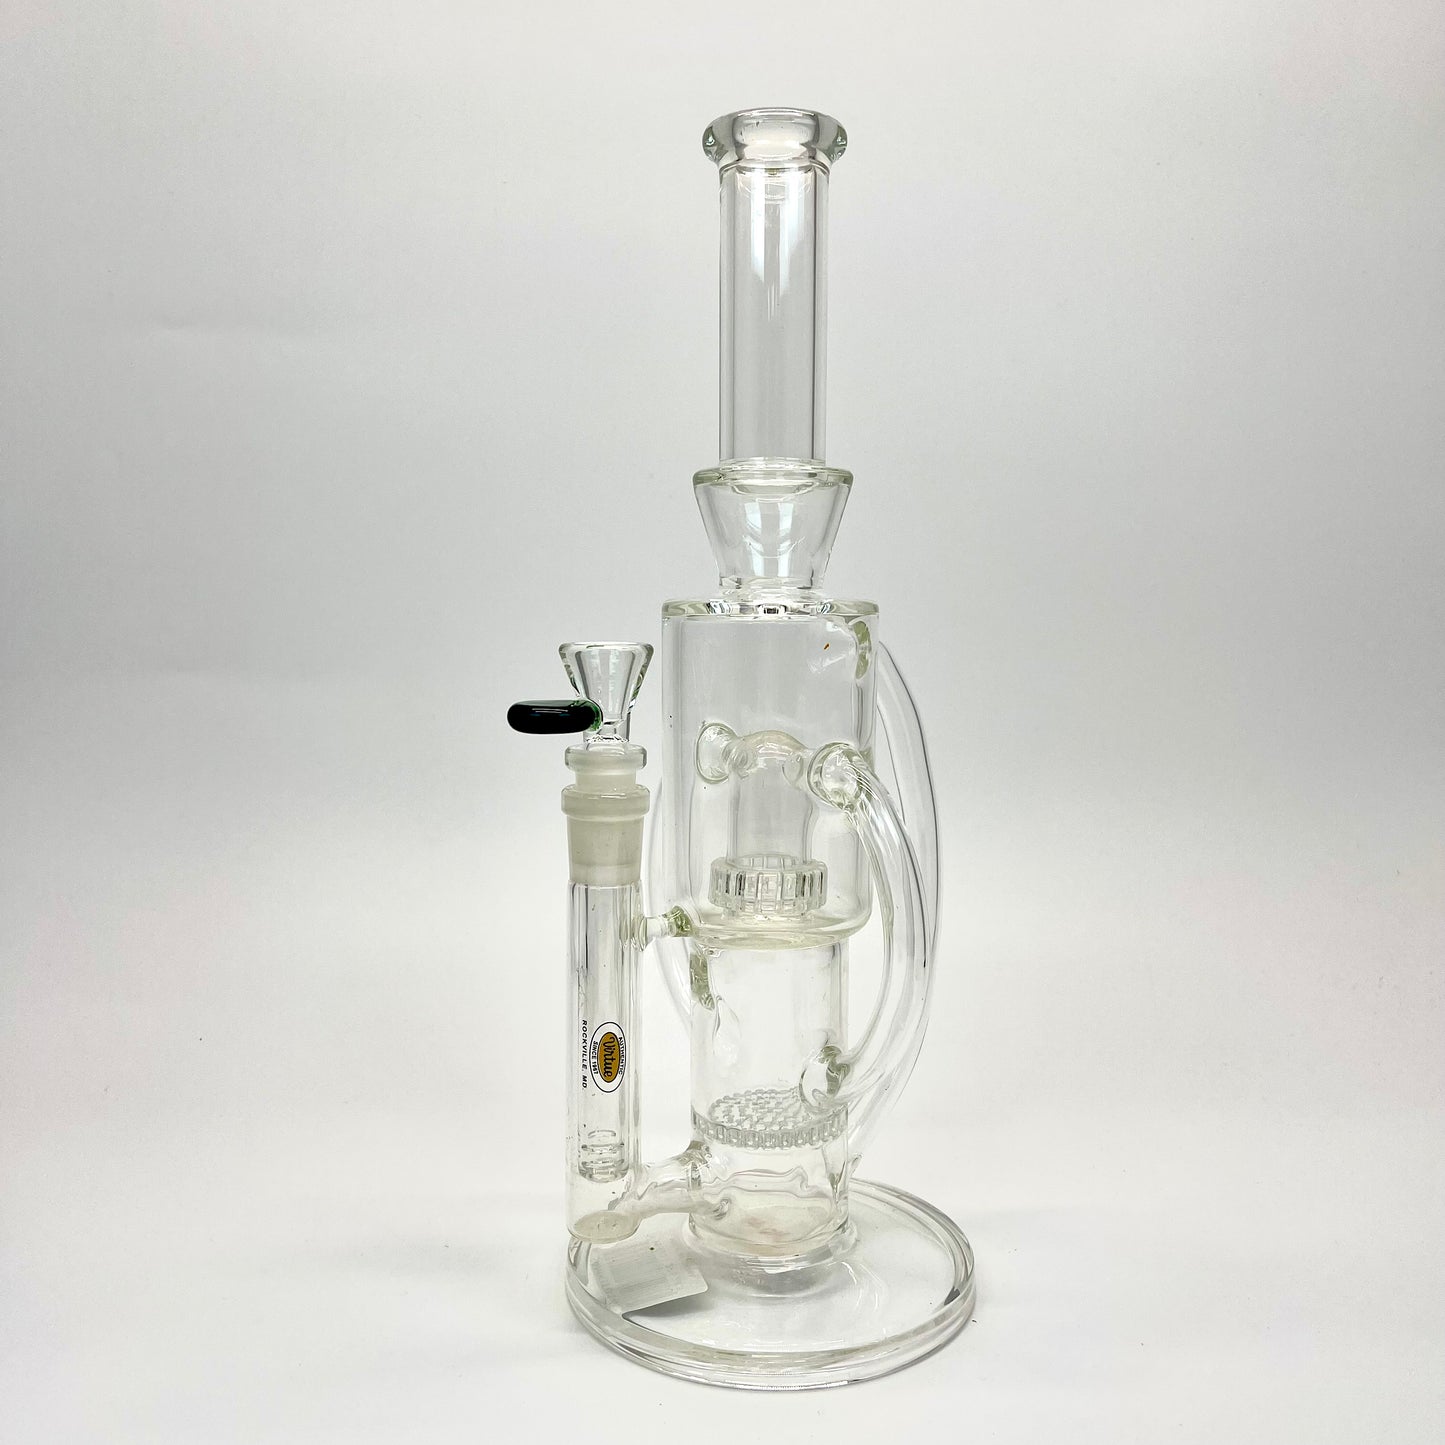 Weedo Large Glass Bongs (36cm)(Special Edition Only 1 In Stock)